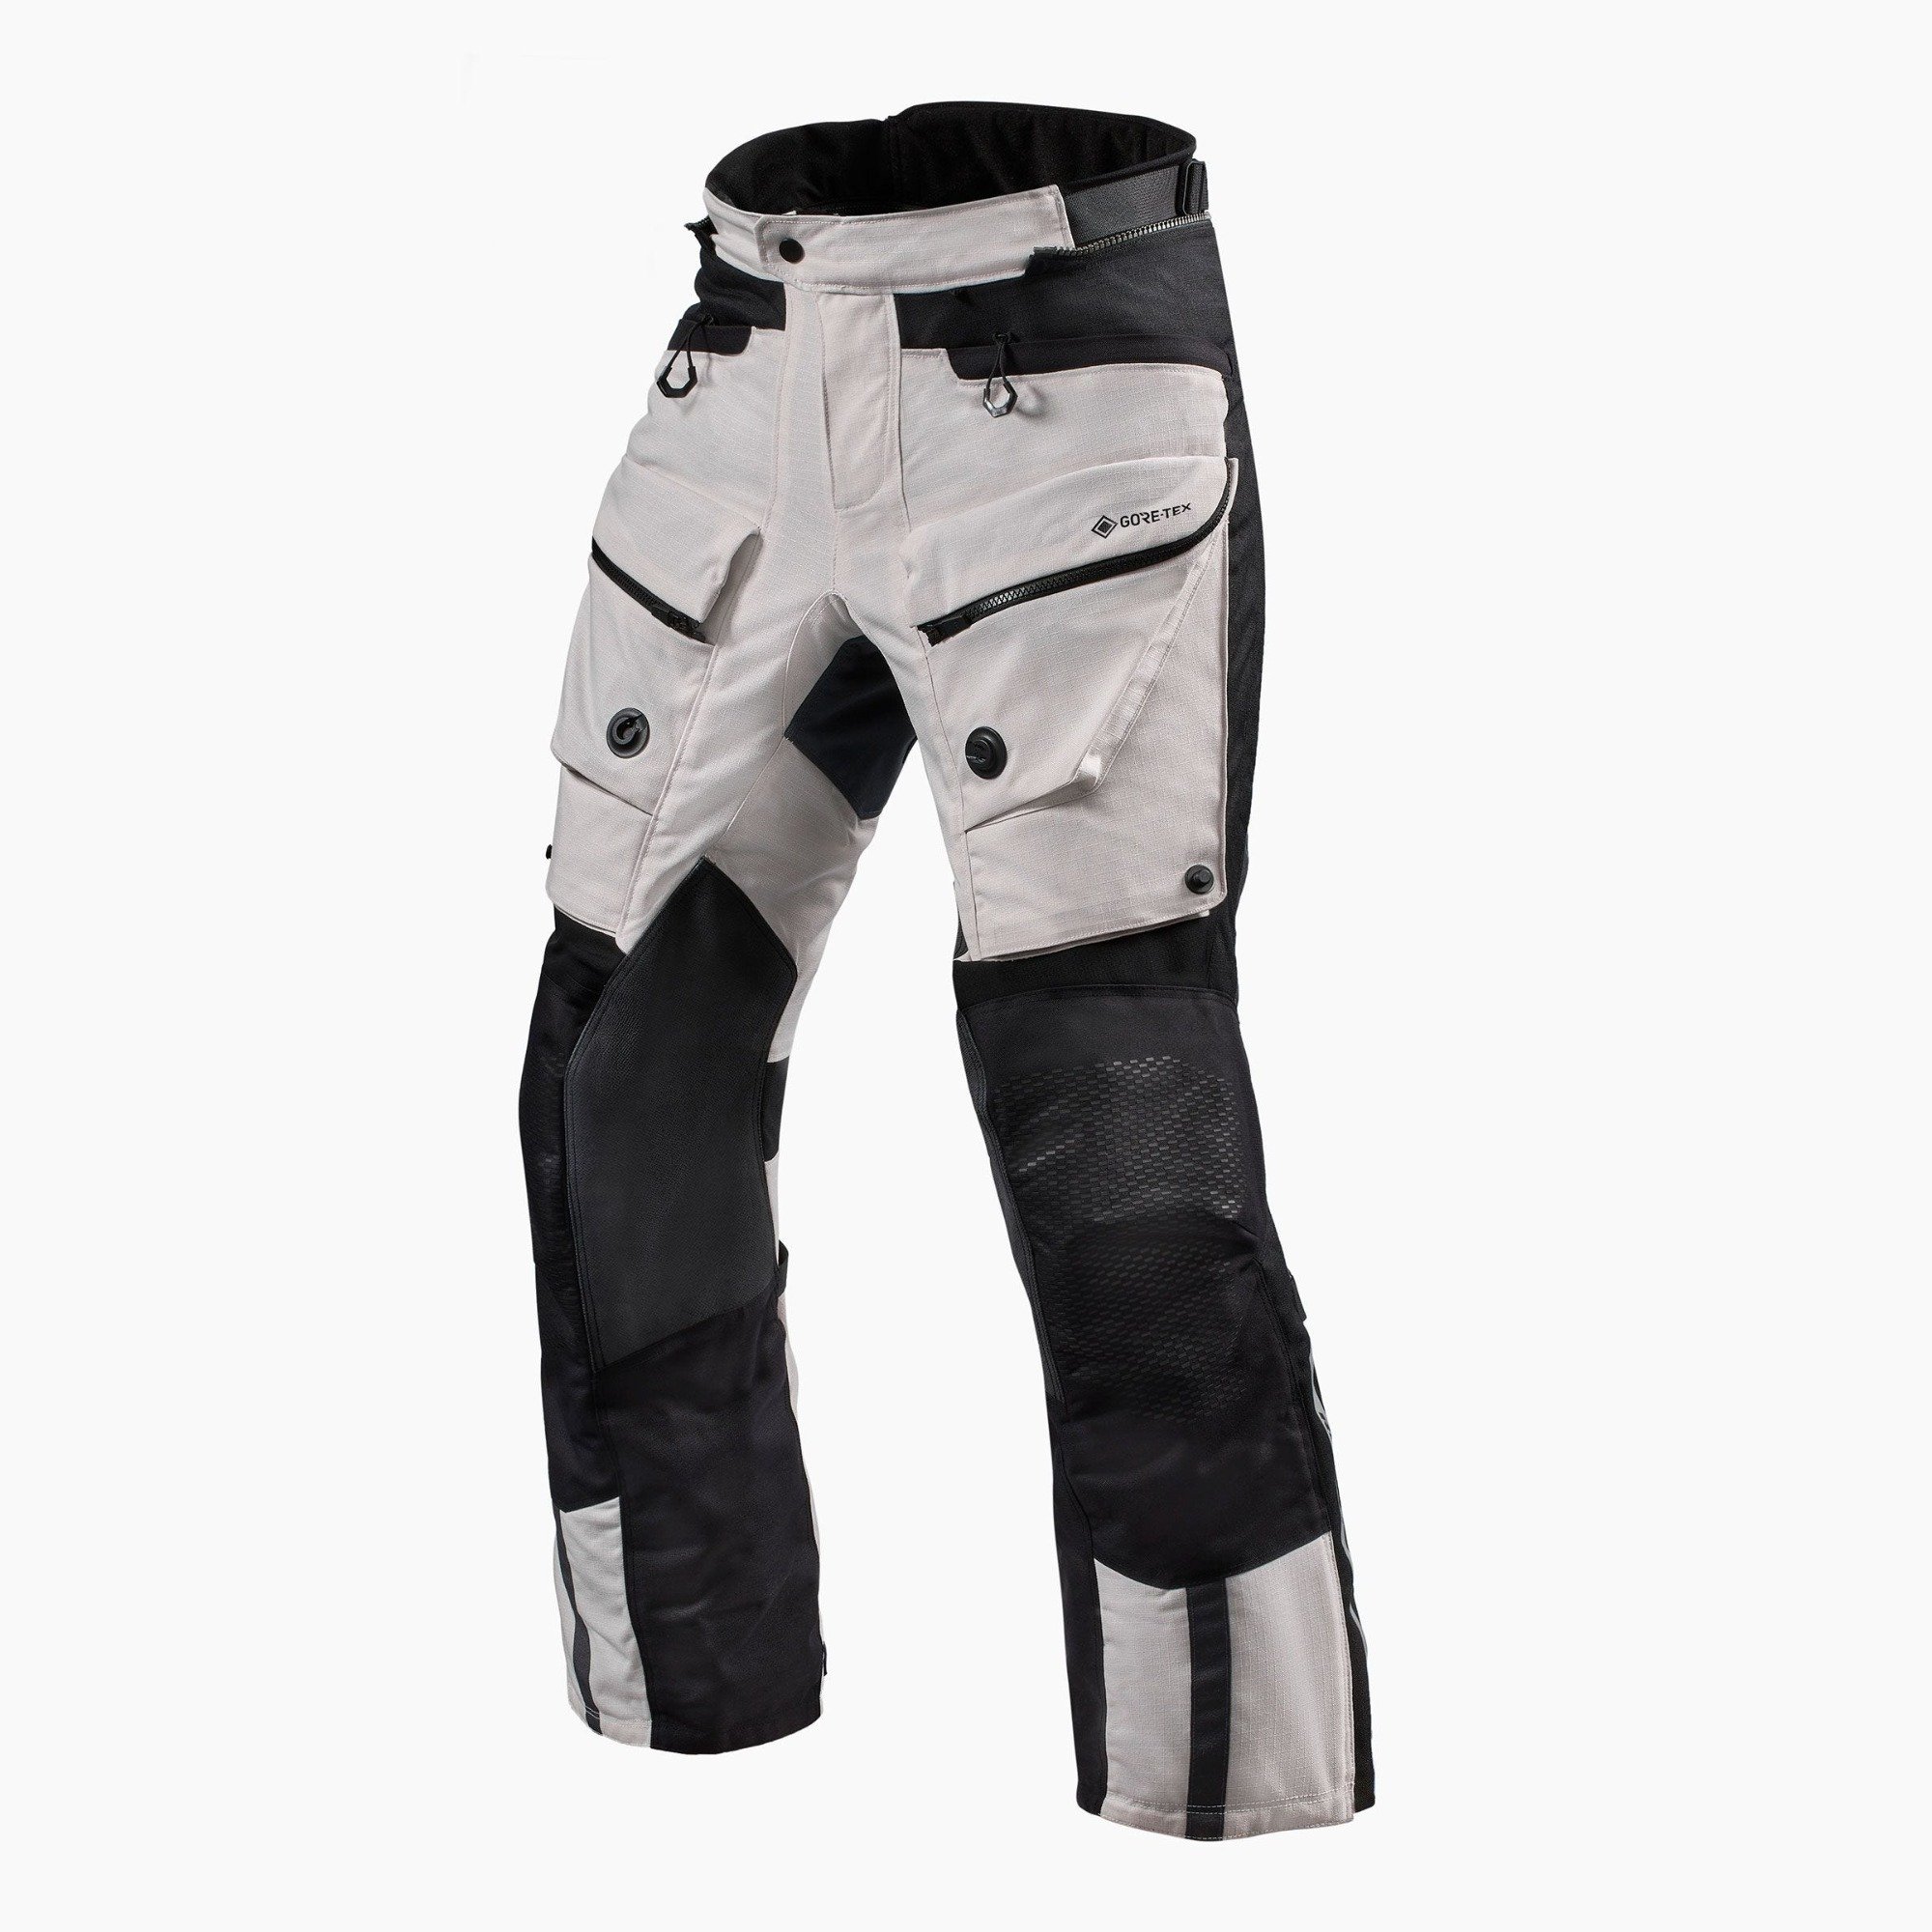 Image of REV'IT! Trousers Defender 3 GTX Silver Black Short Motorcycle Pants Talla 2XL